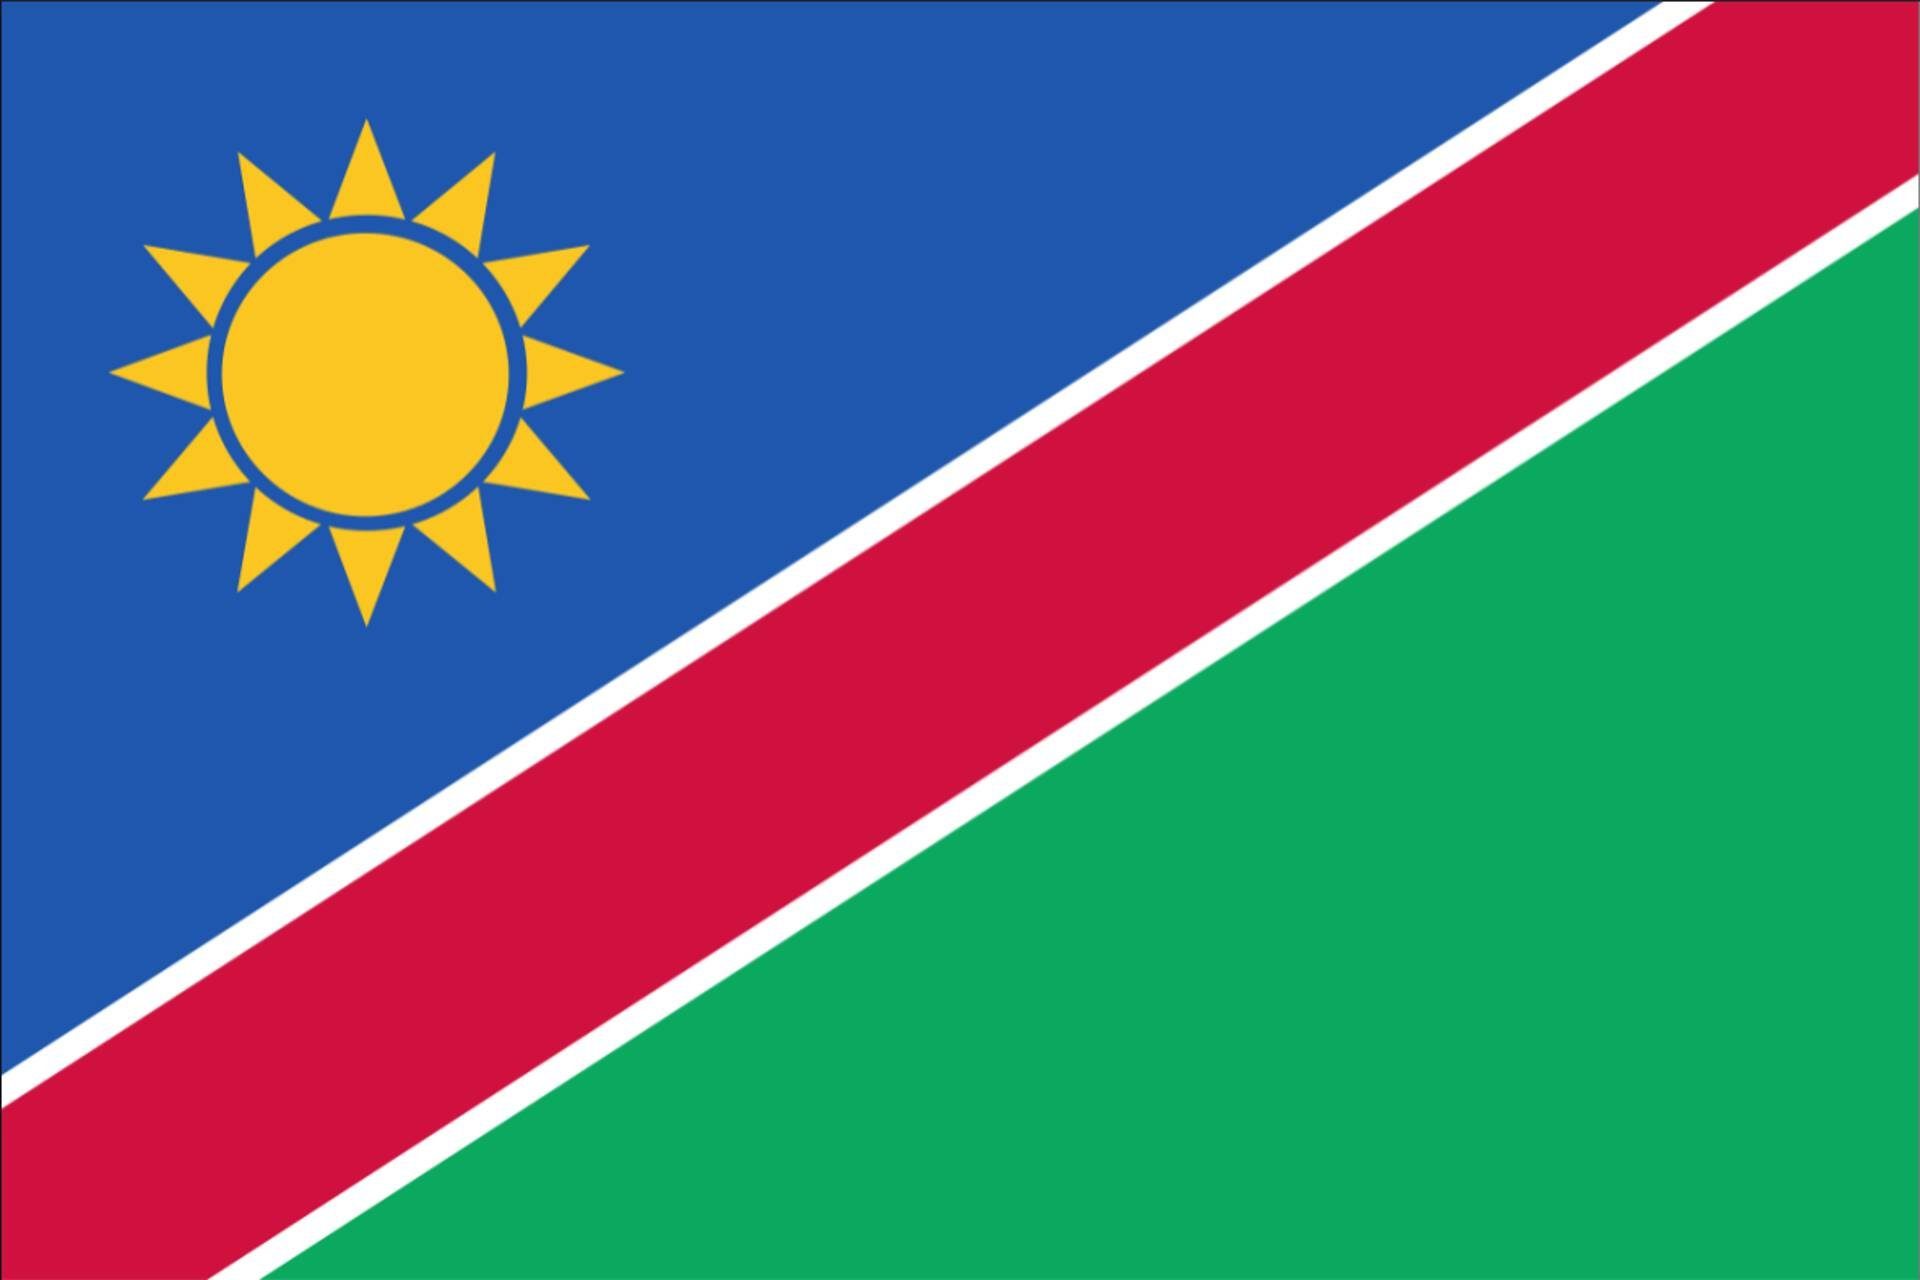 g/m² flaggenmeer 110 Querformat Flagge Namibia Flagge